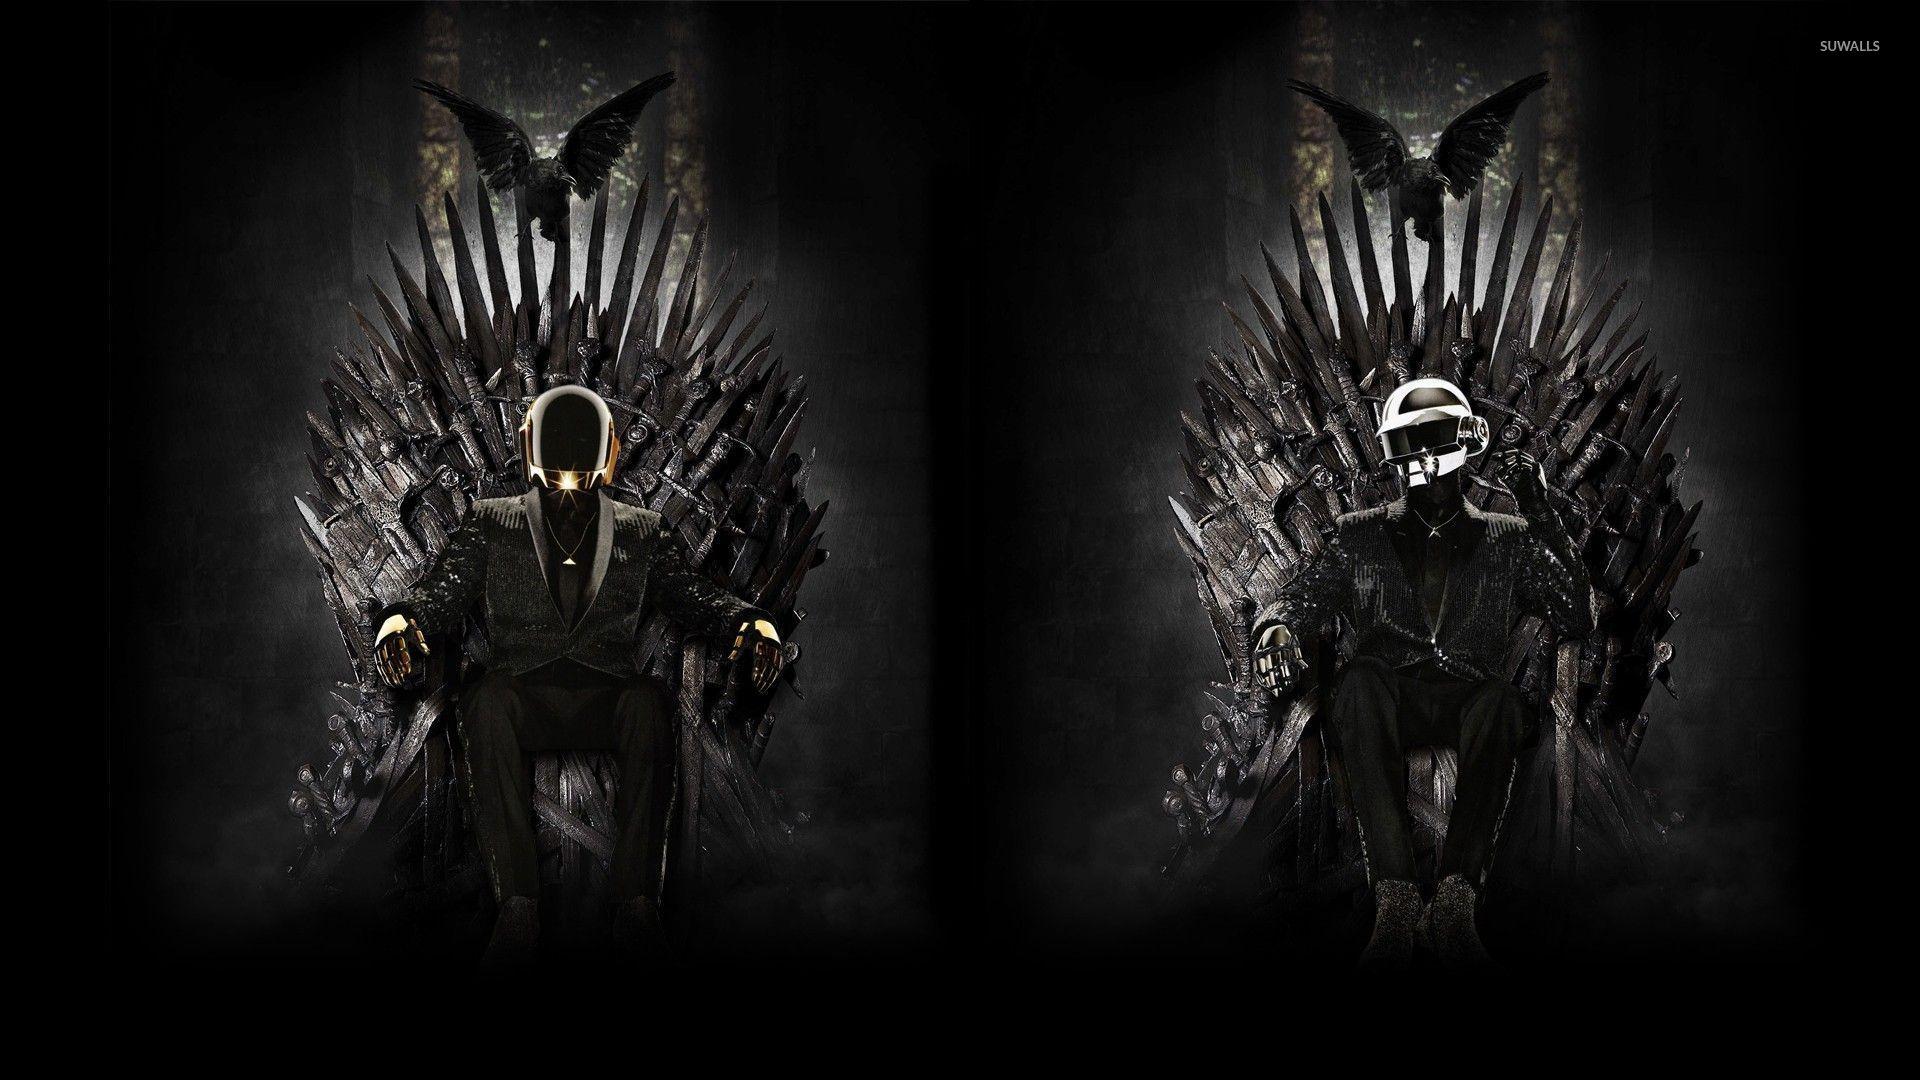 Daft Punk On The Iron Throne X PIC WSW1075878 Wallpaper